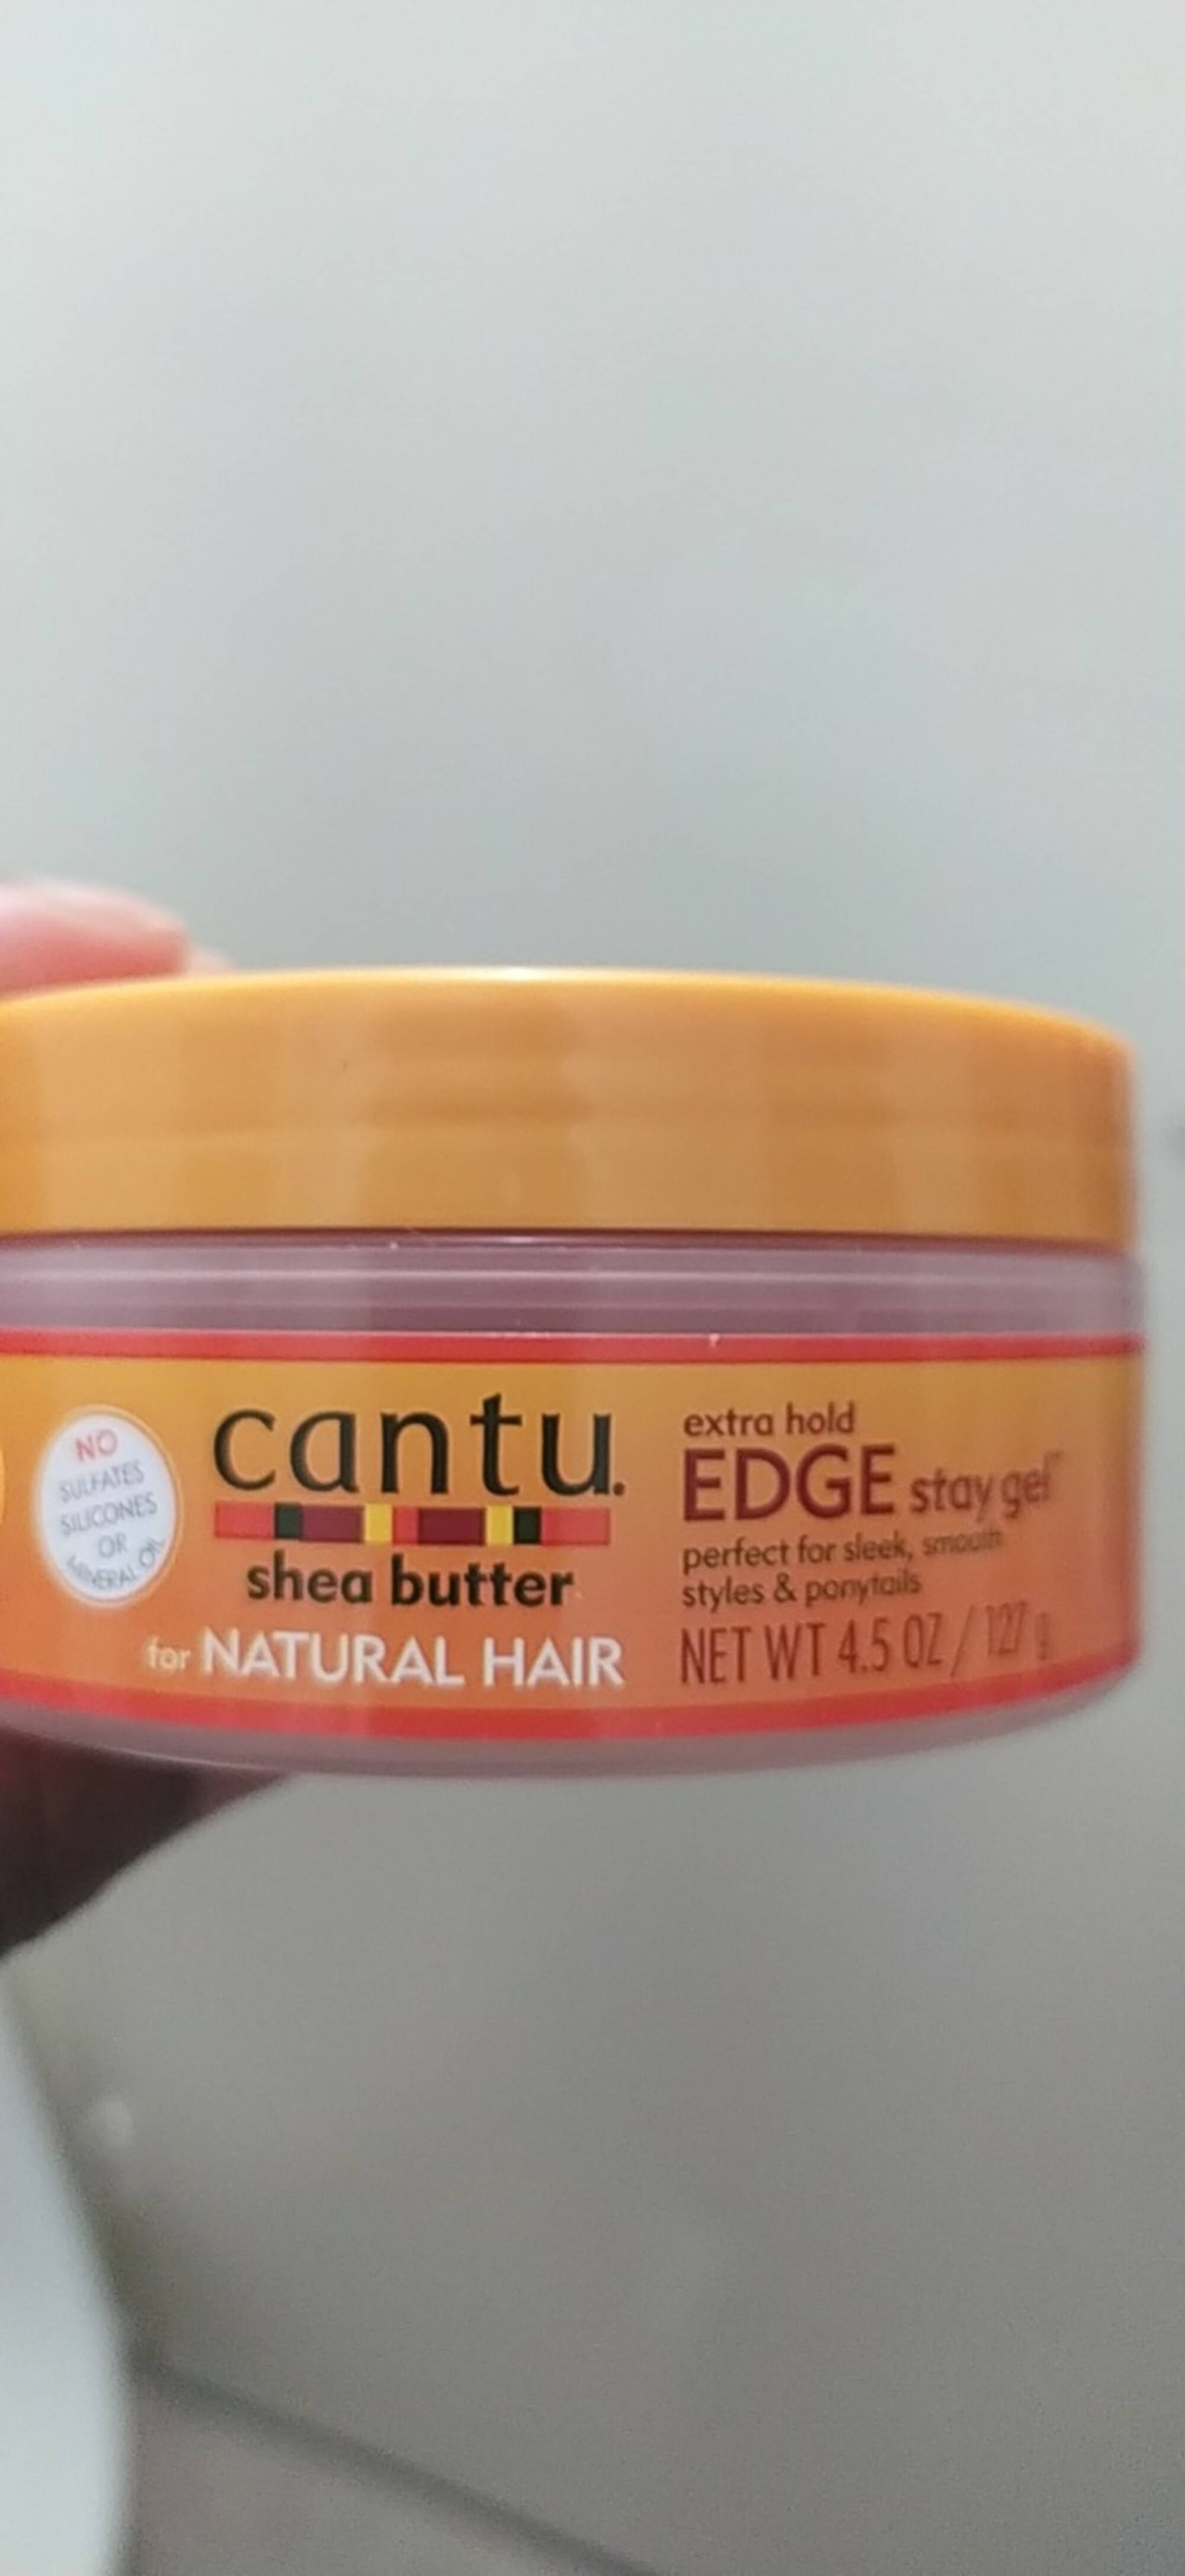 CANTU - Extra hold edge stay gel